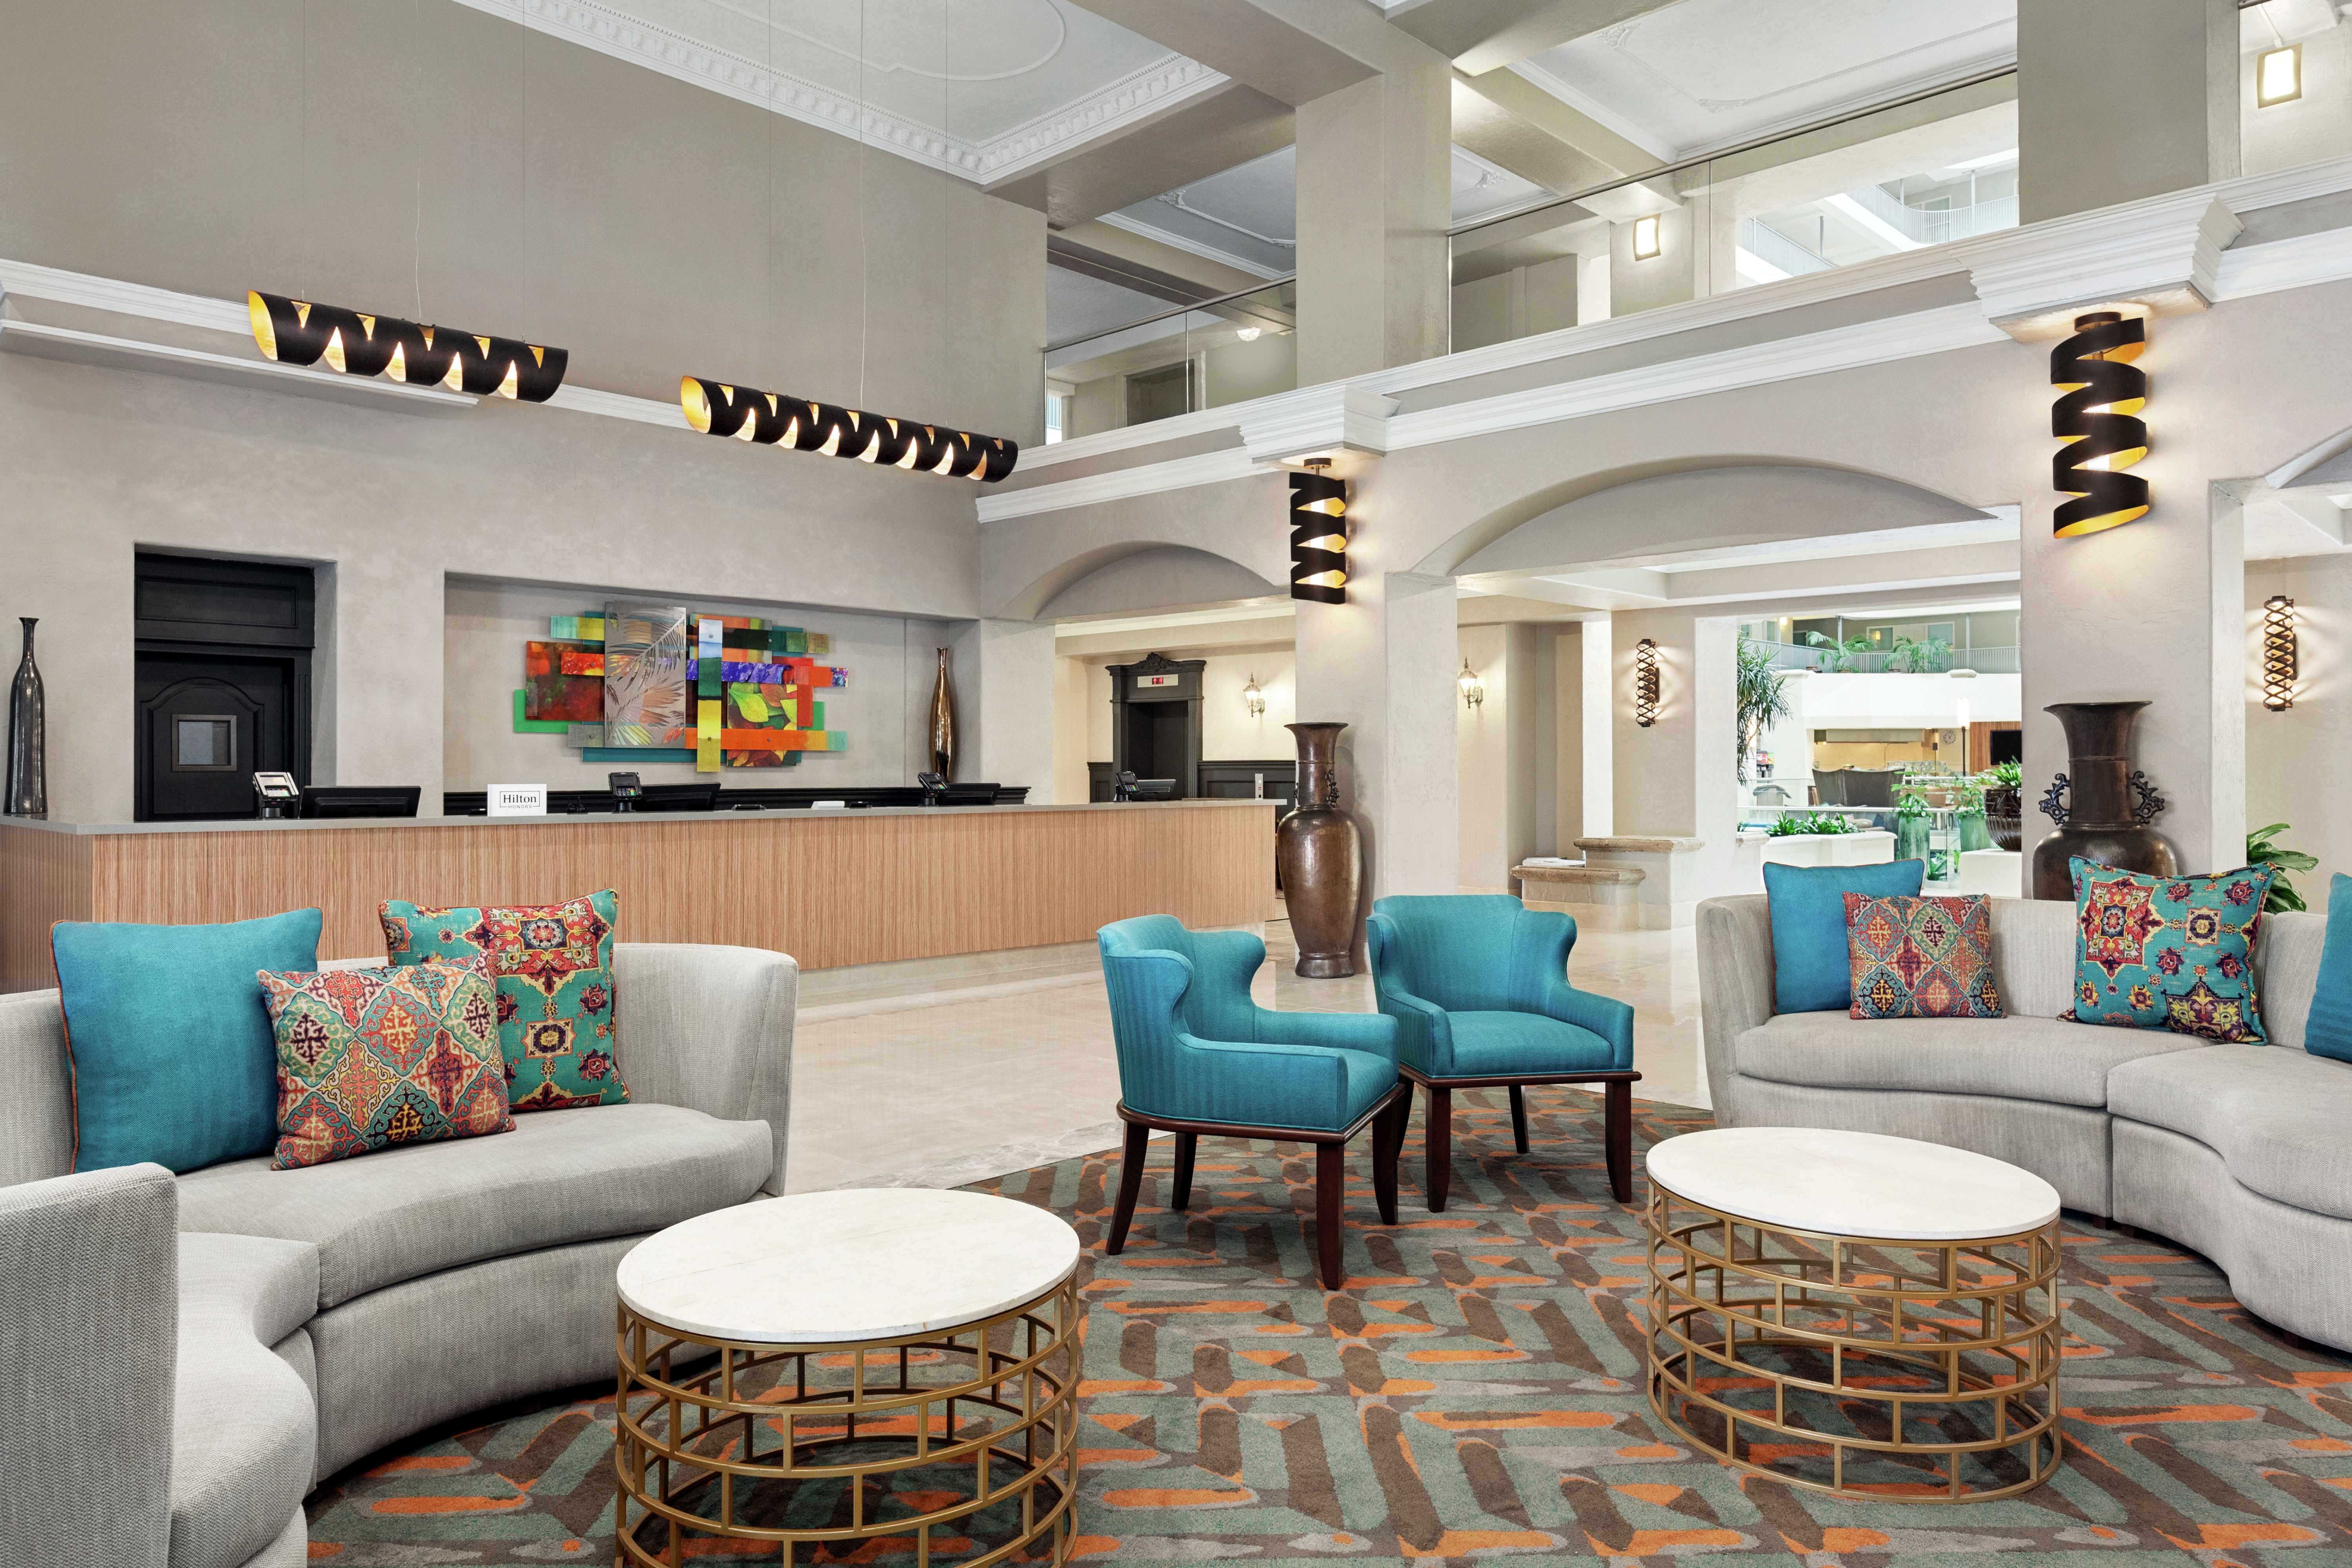 Hotel Lobby Front Desk and Lounge Area